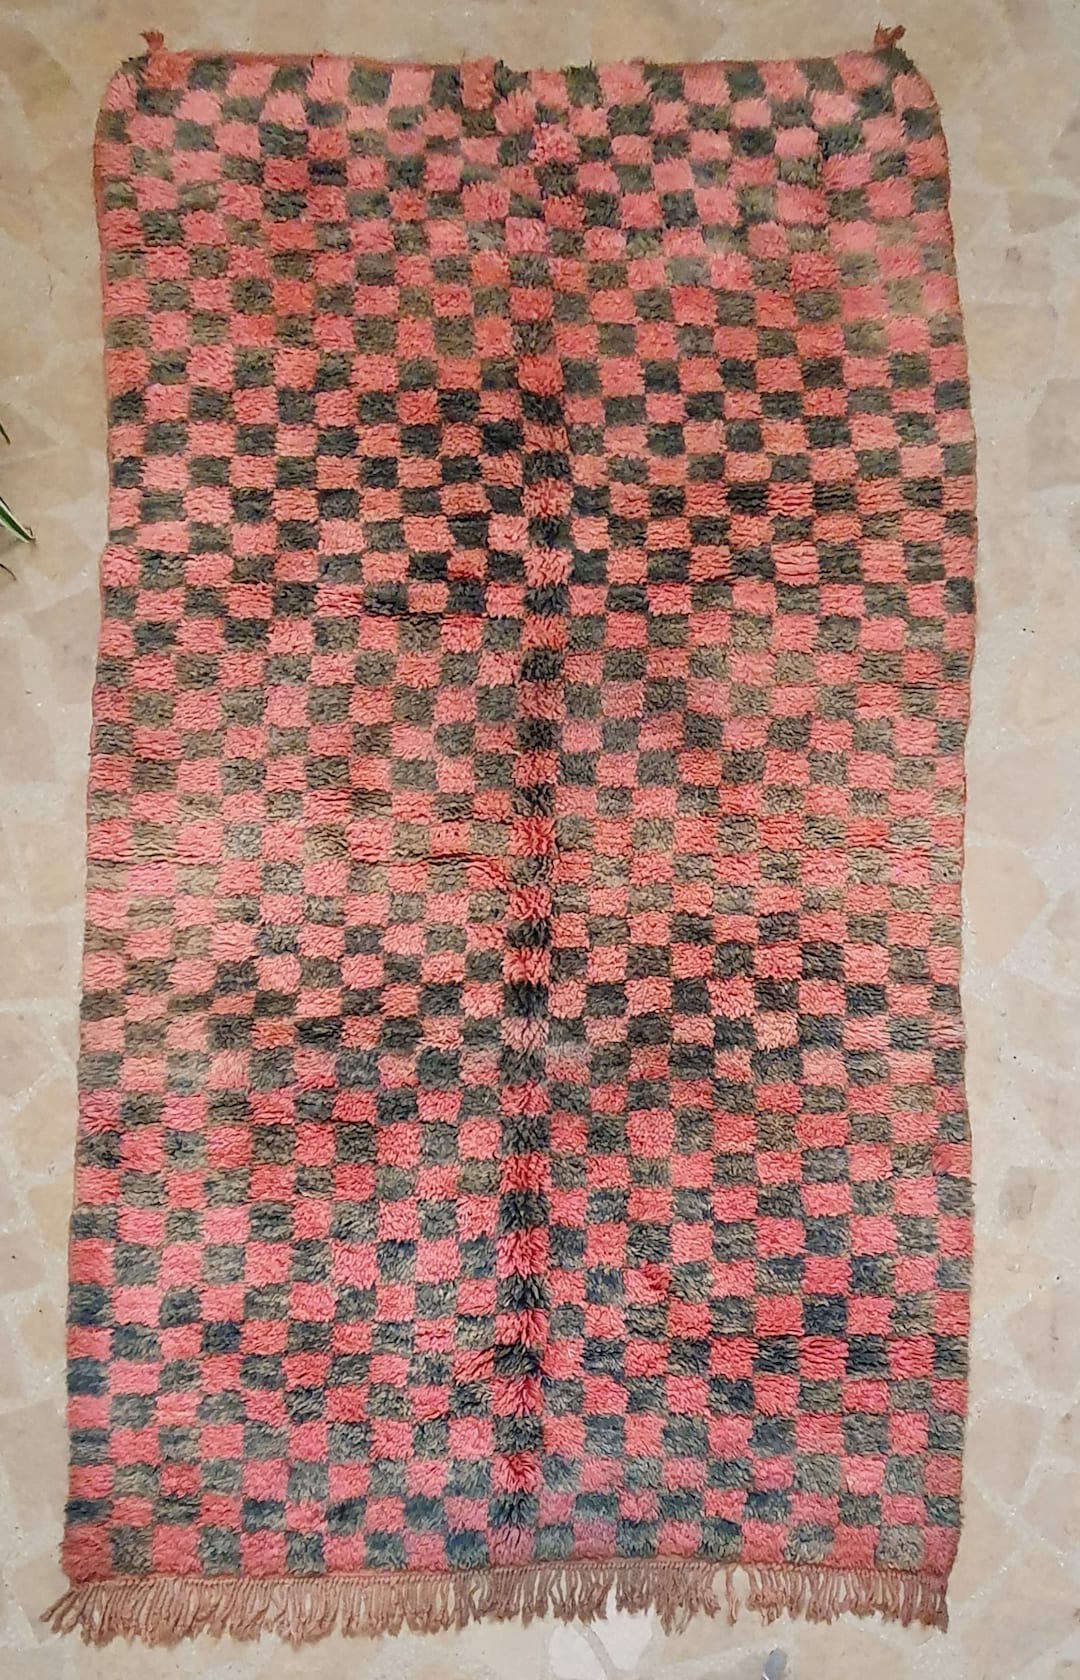 Vintage Checkered Moroccan Handmade Wool Area Berber BohoPhilippines